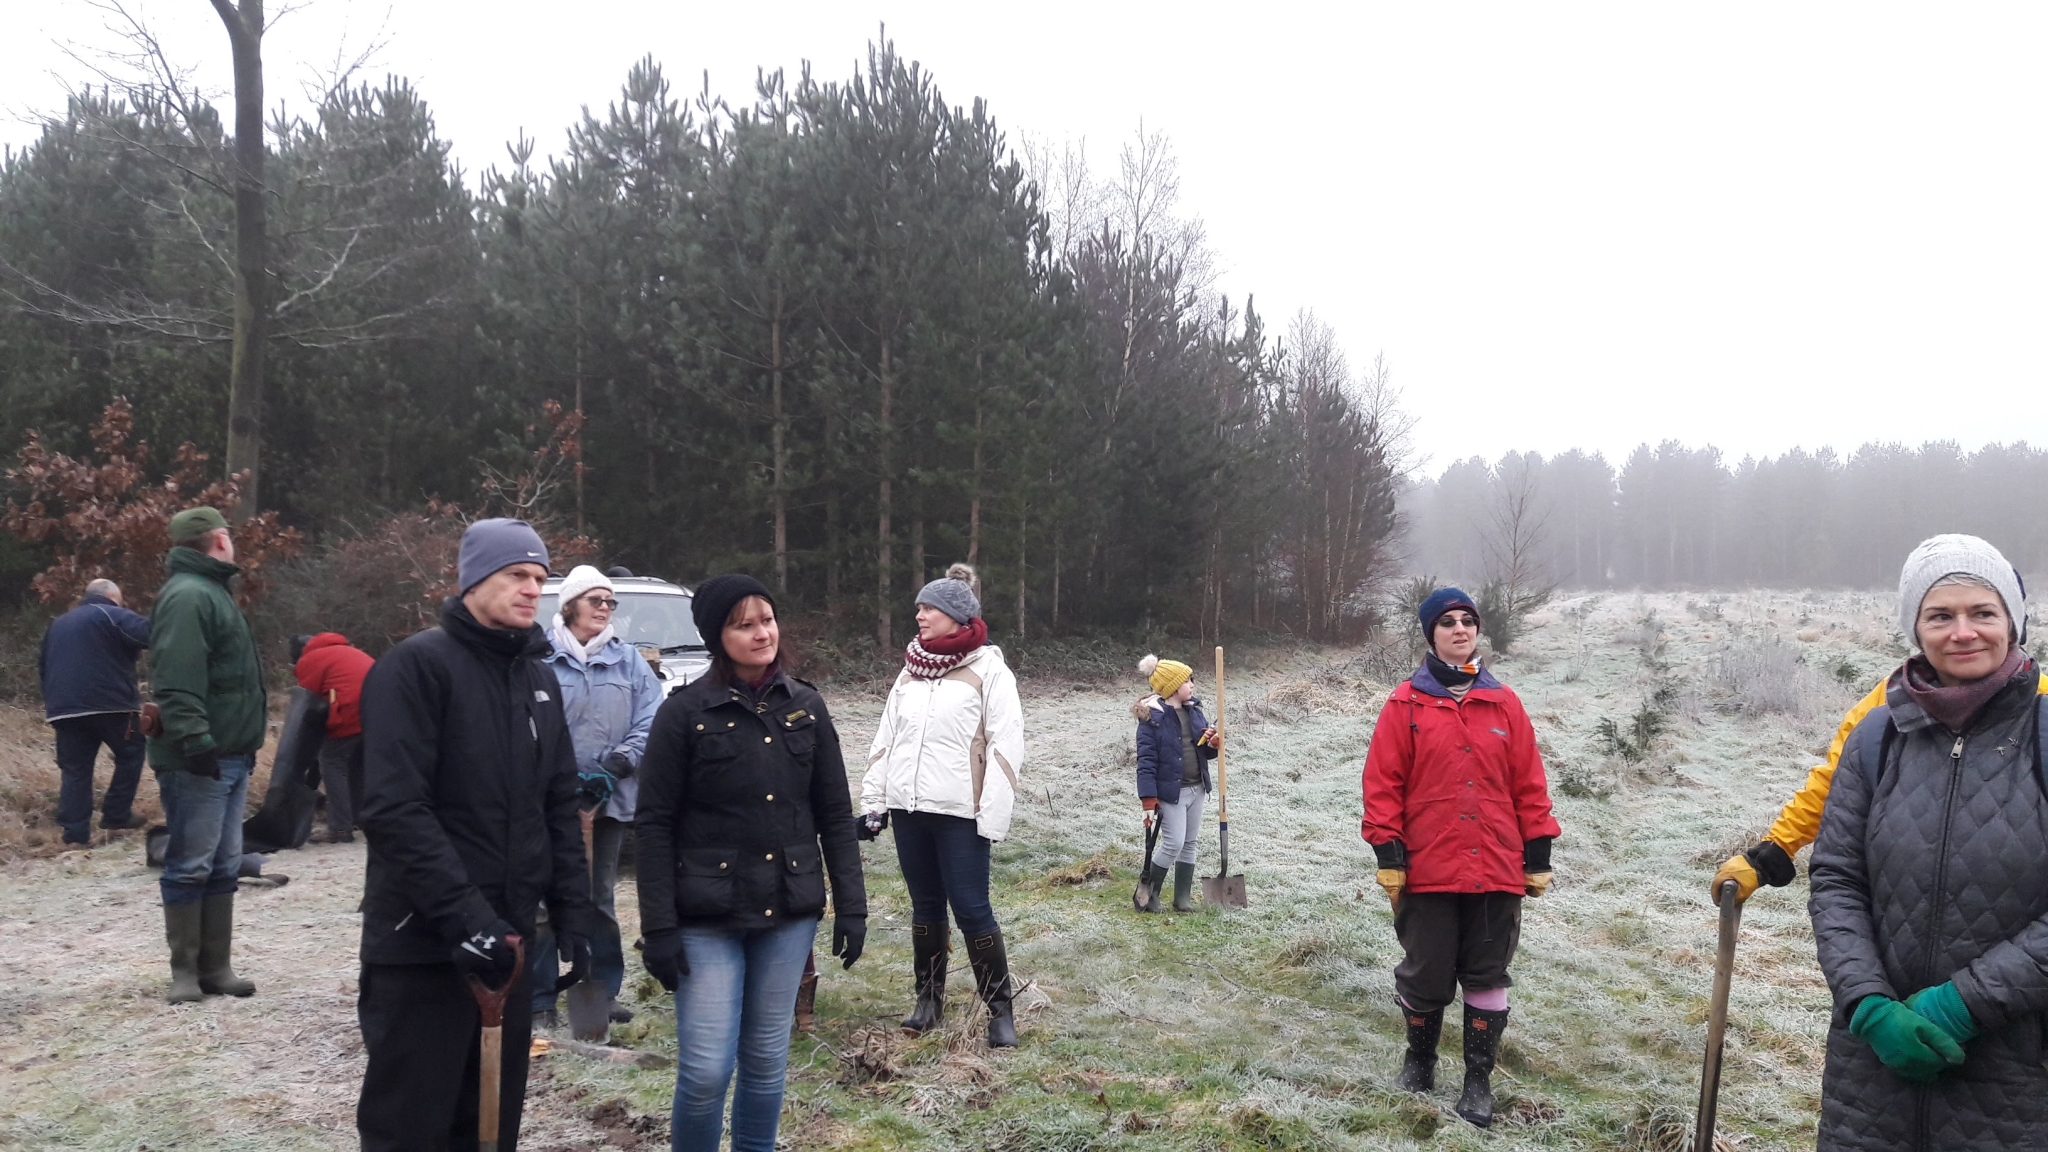 A photo from the FoTF Conservation Event - January 2018 - Erecting the Toad Fence at Cranwich : The volunteers gather for a briefing